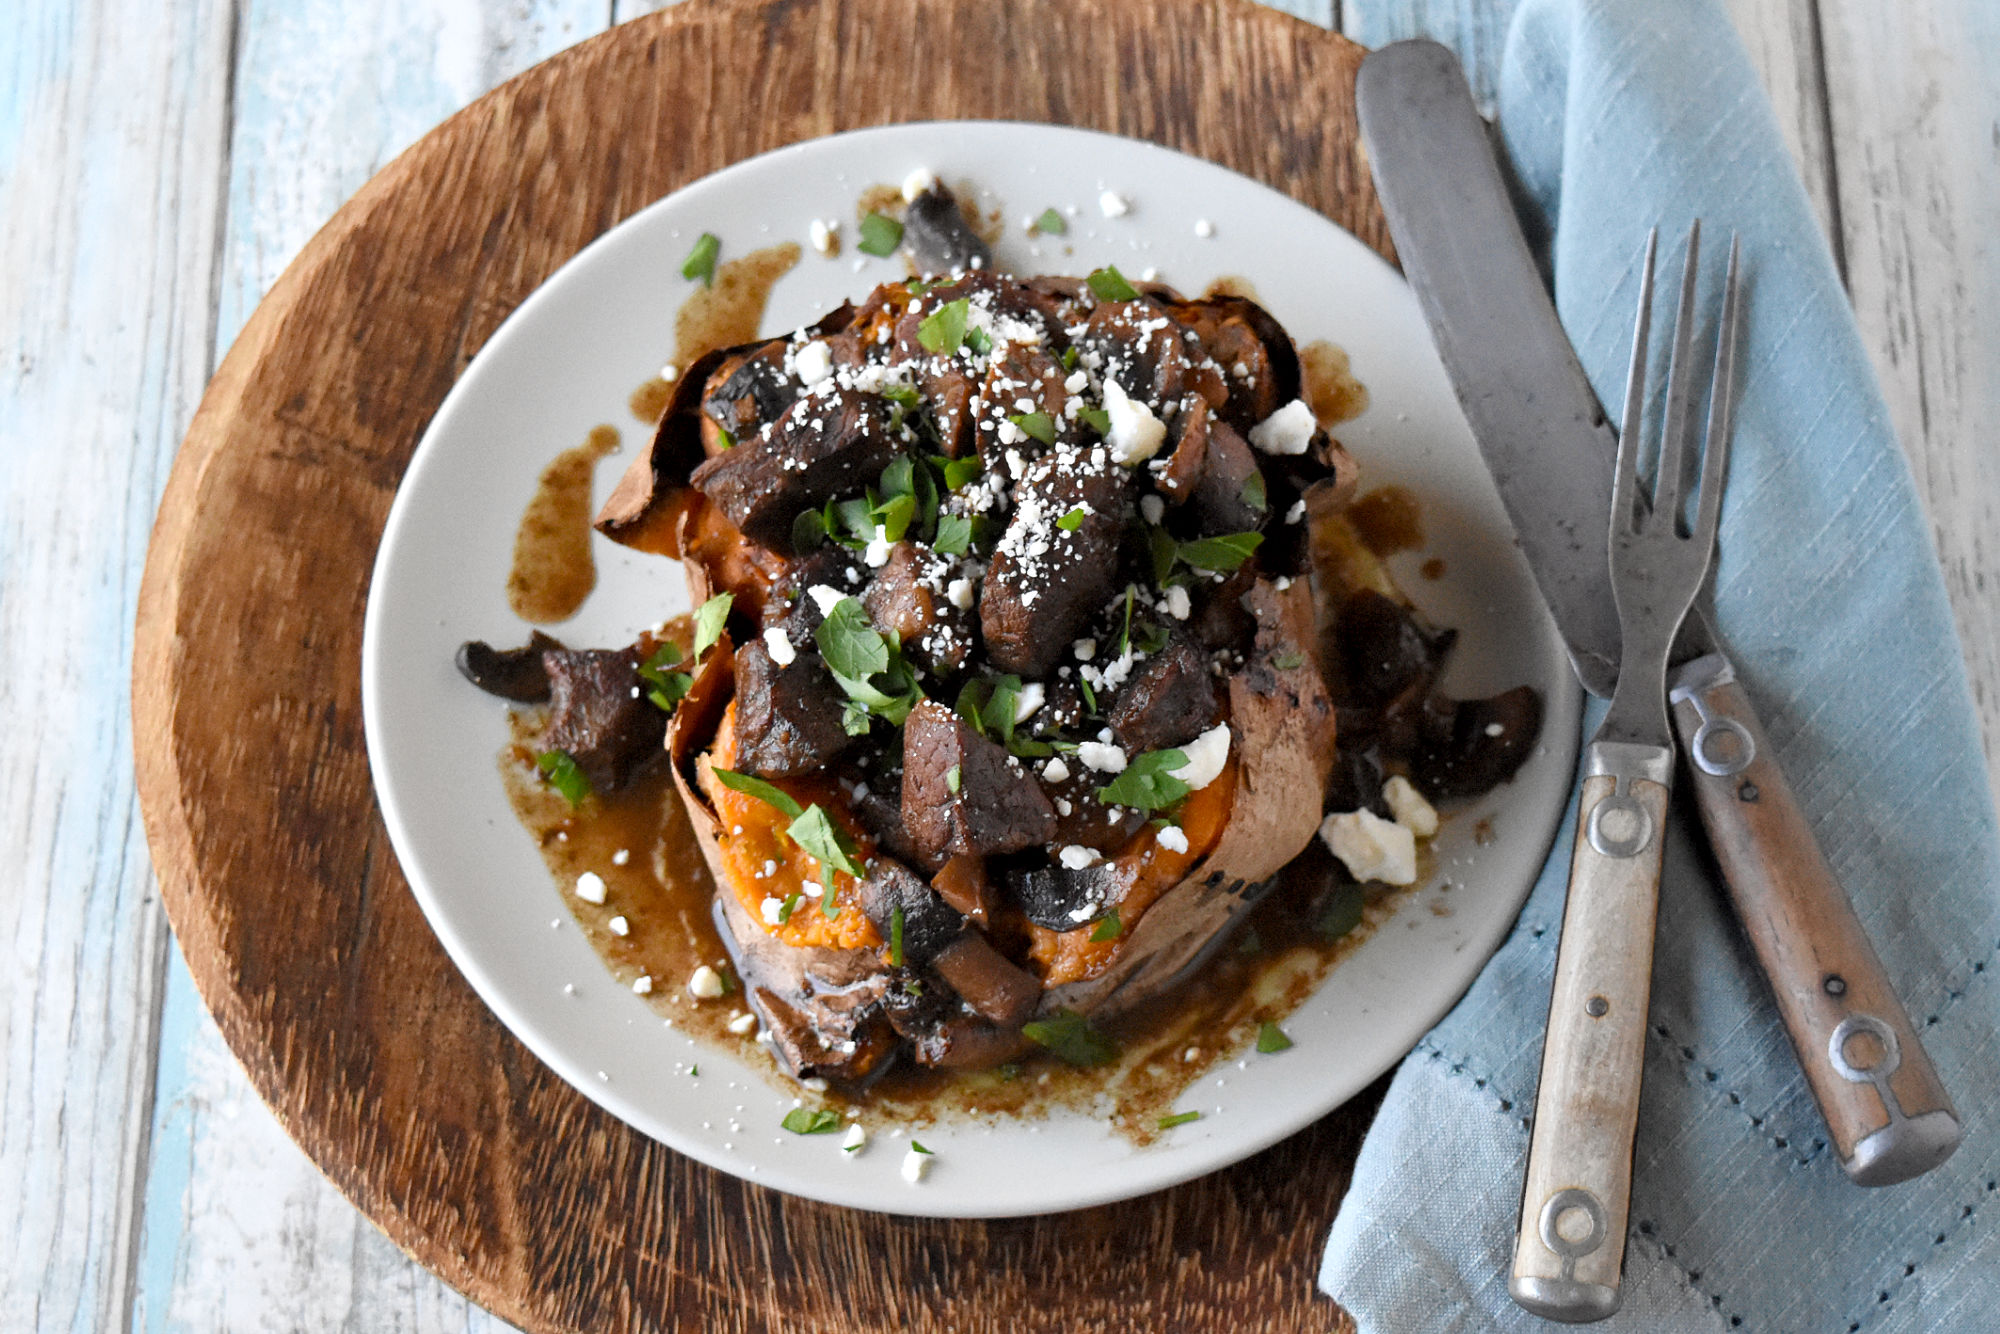 Hold onto your taste buds you go on a flavor journey with Balsamic Steak and Mushroom Bites recipe.  Whether you're cooking for a special occasion or simply craving a culinary adventure, this recipe will not disappoint. #SteakLovers #MushroomMagic #GourmetAtHome #FoodieDiaries
